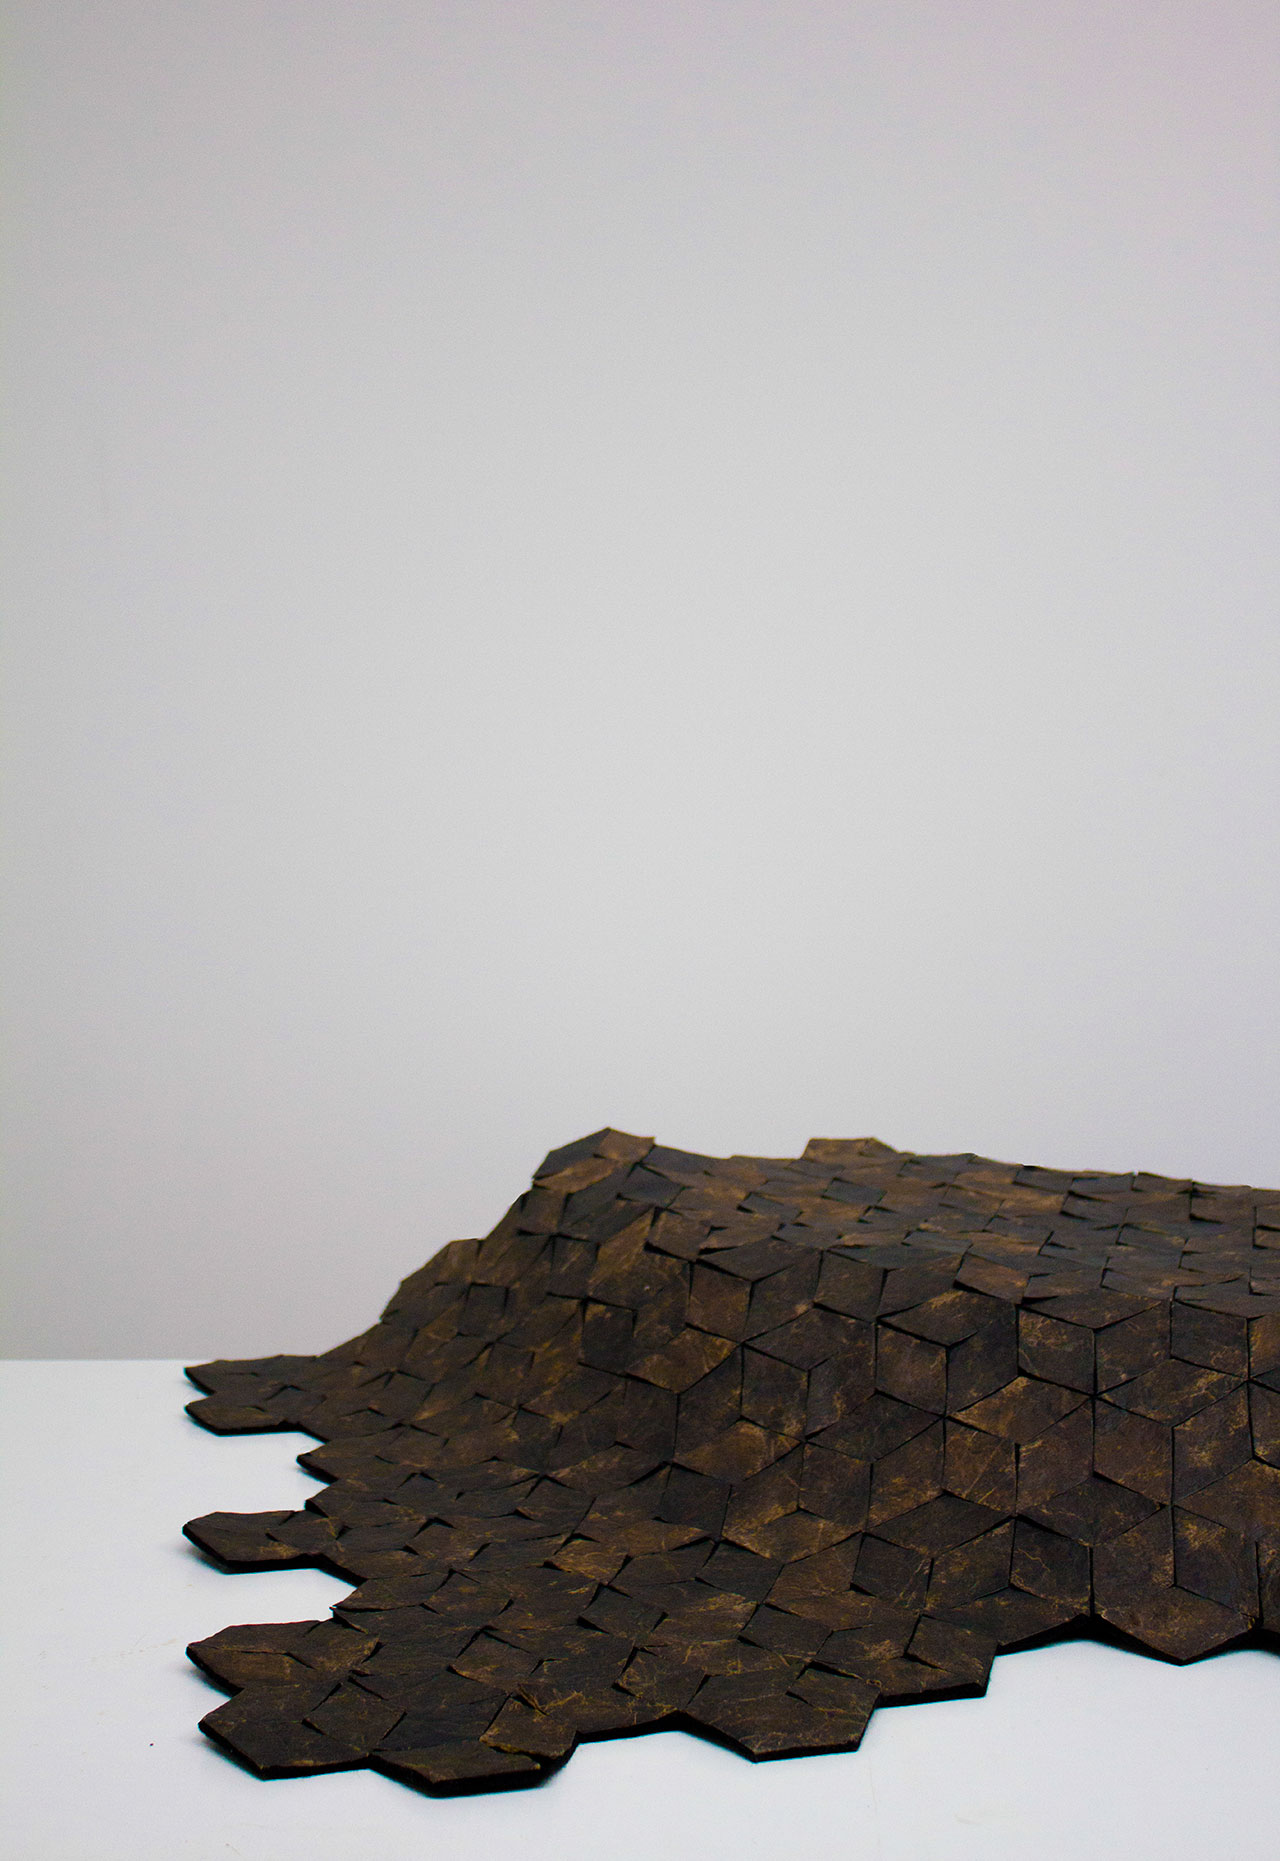 Marlène Huissoud, From Insects, Silk rug. Hundred of lozenges made out of the ‘Wooden Leather‘, assembled together to create a flexible surface. Photo by Yesenia Tibault Picazo.